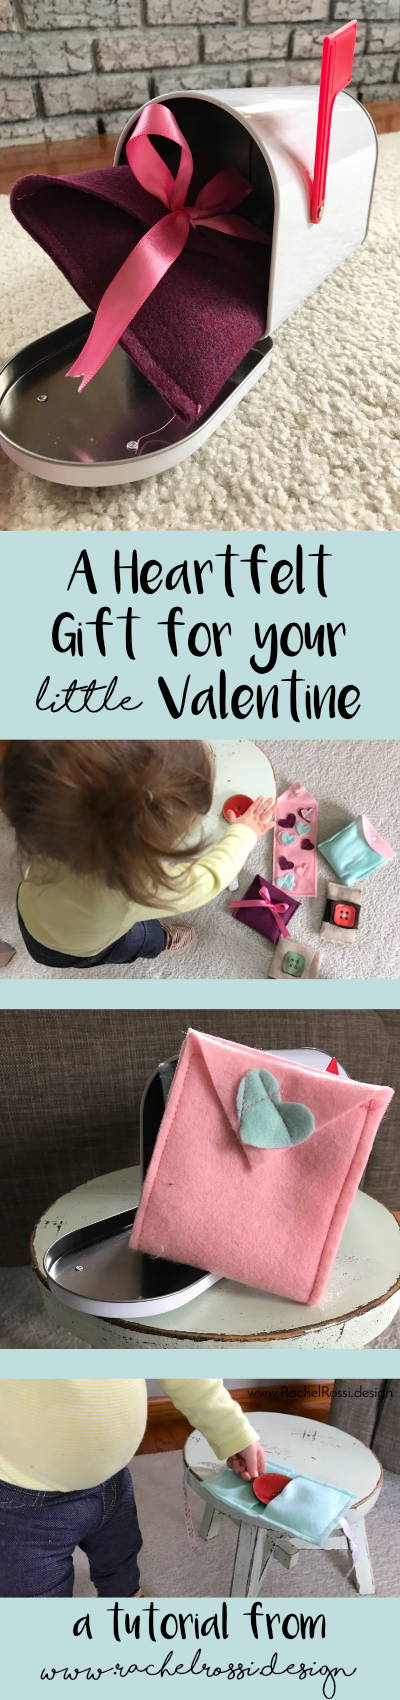 A lovely little tutorial on how to make felt valentines for your little one! This is so cute with the metal mailbox and is a quick and easy project, using what you have at home!